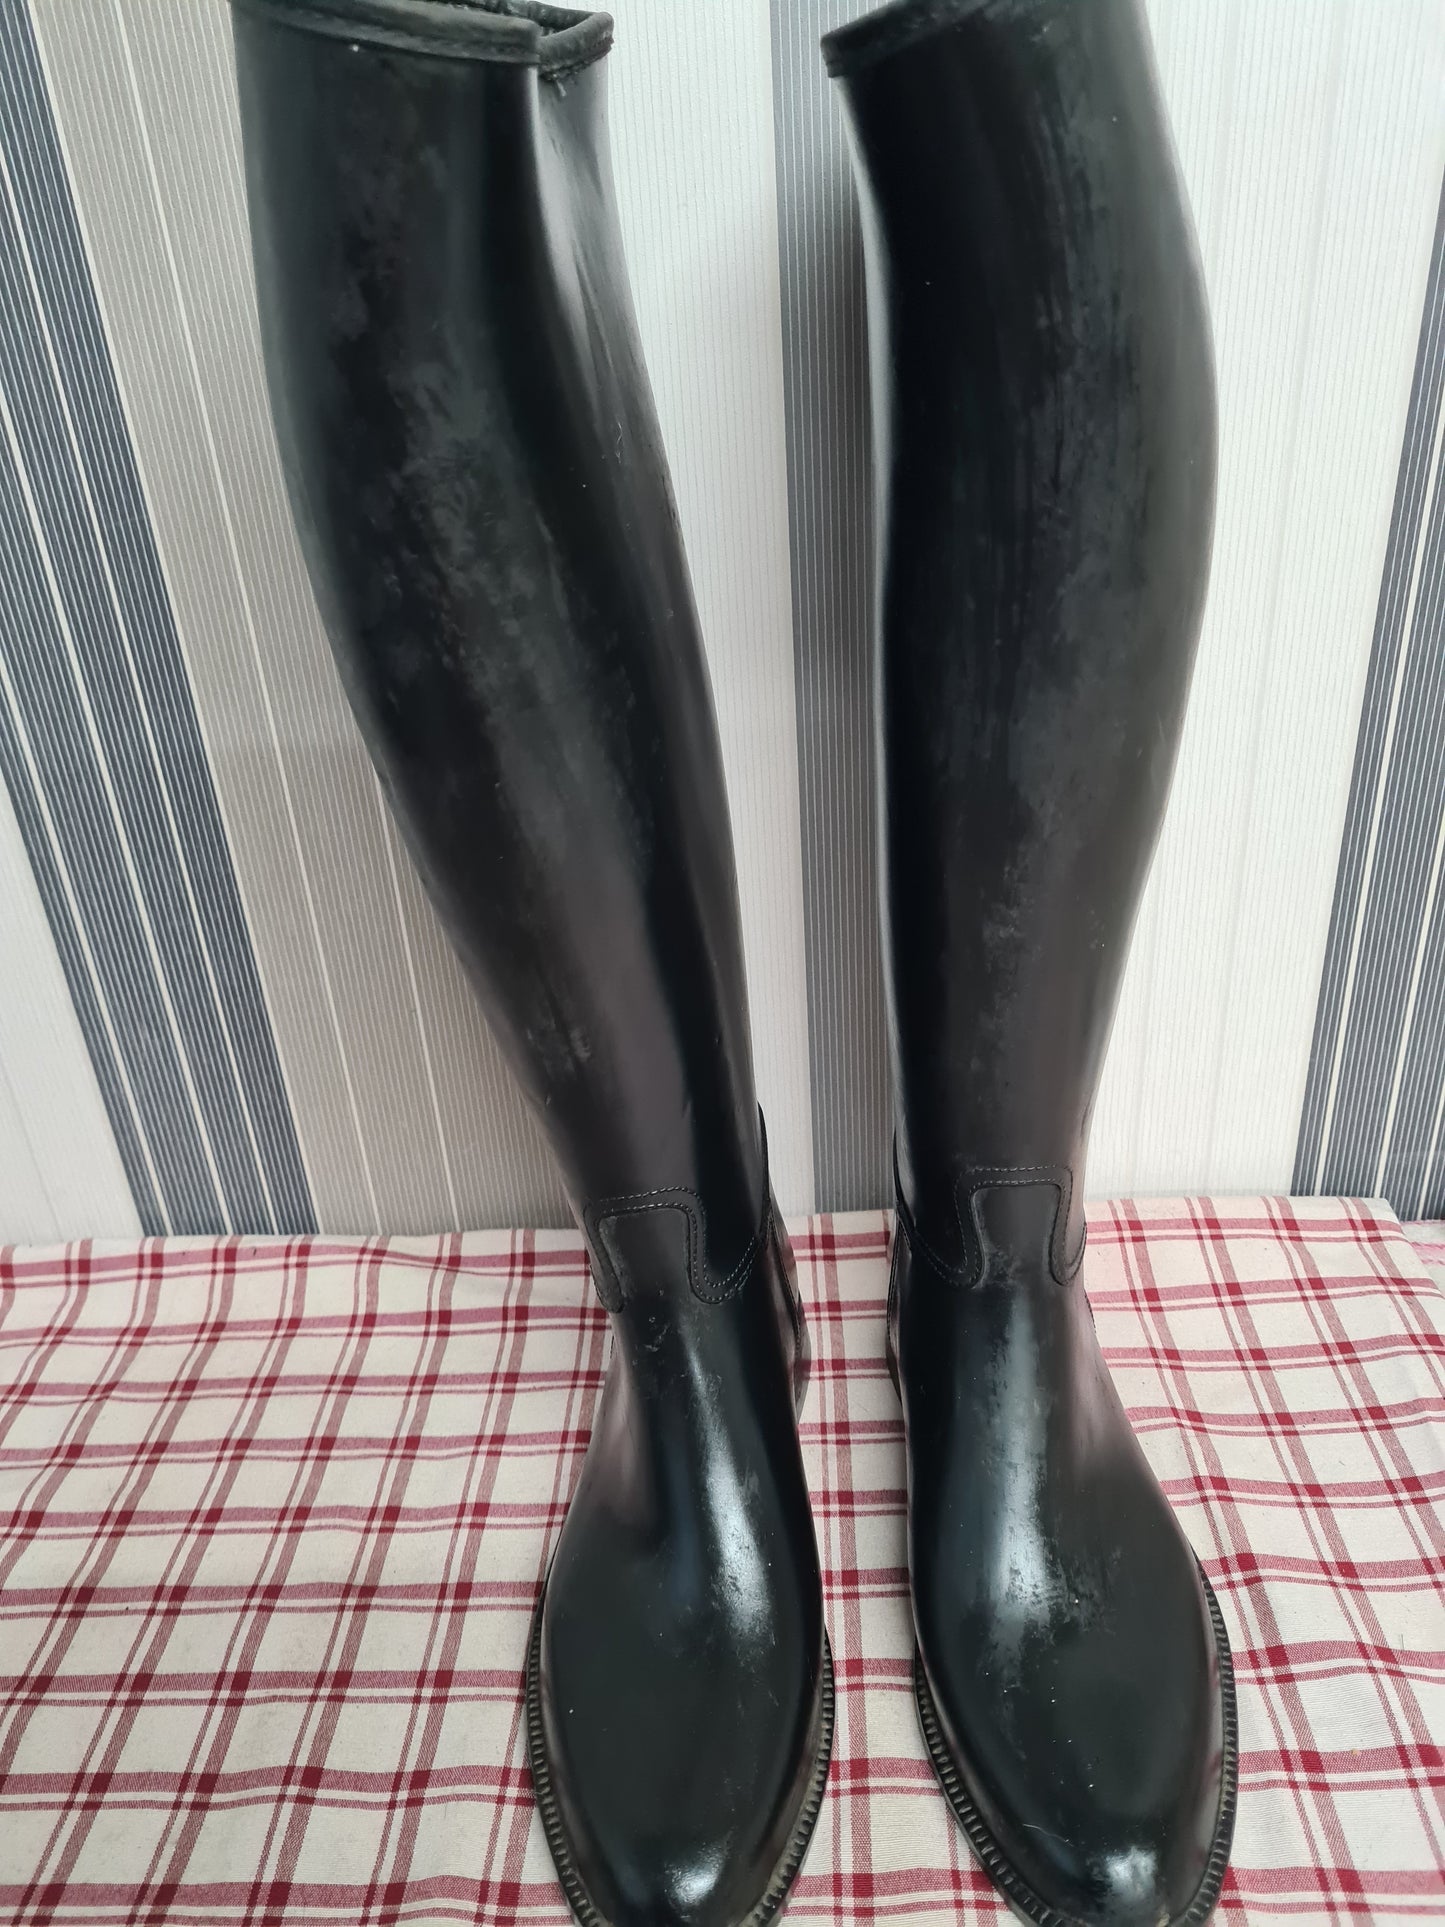 Cottage craft Black long rubber riding boots size 7 FREE POSTAGE🟢